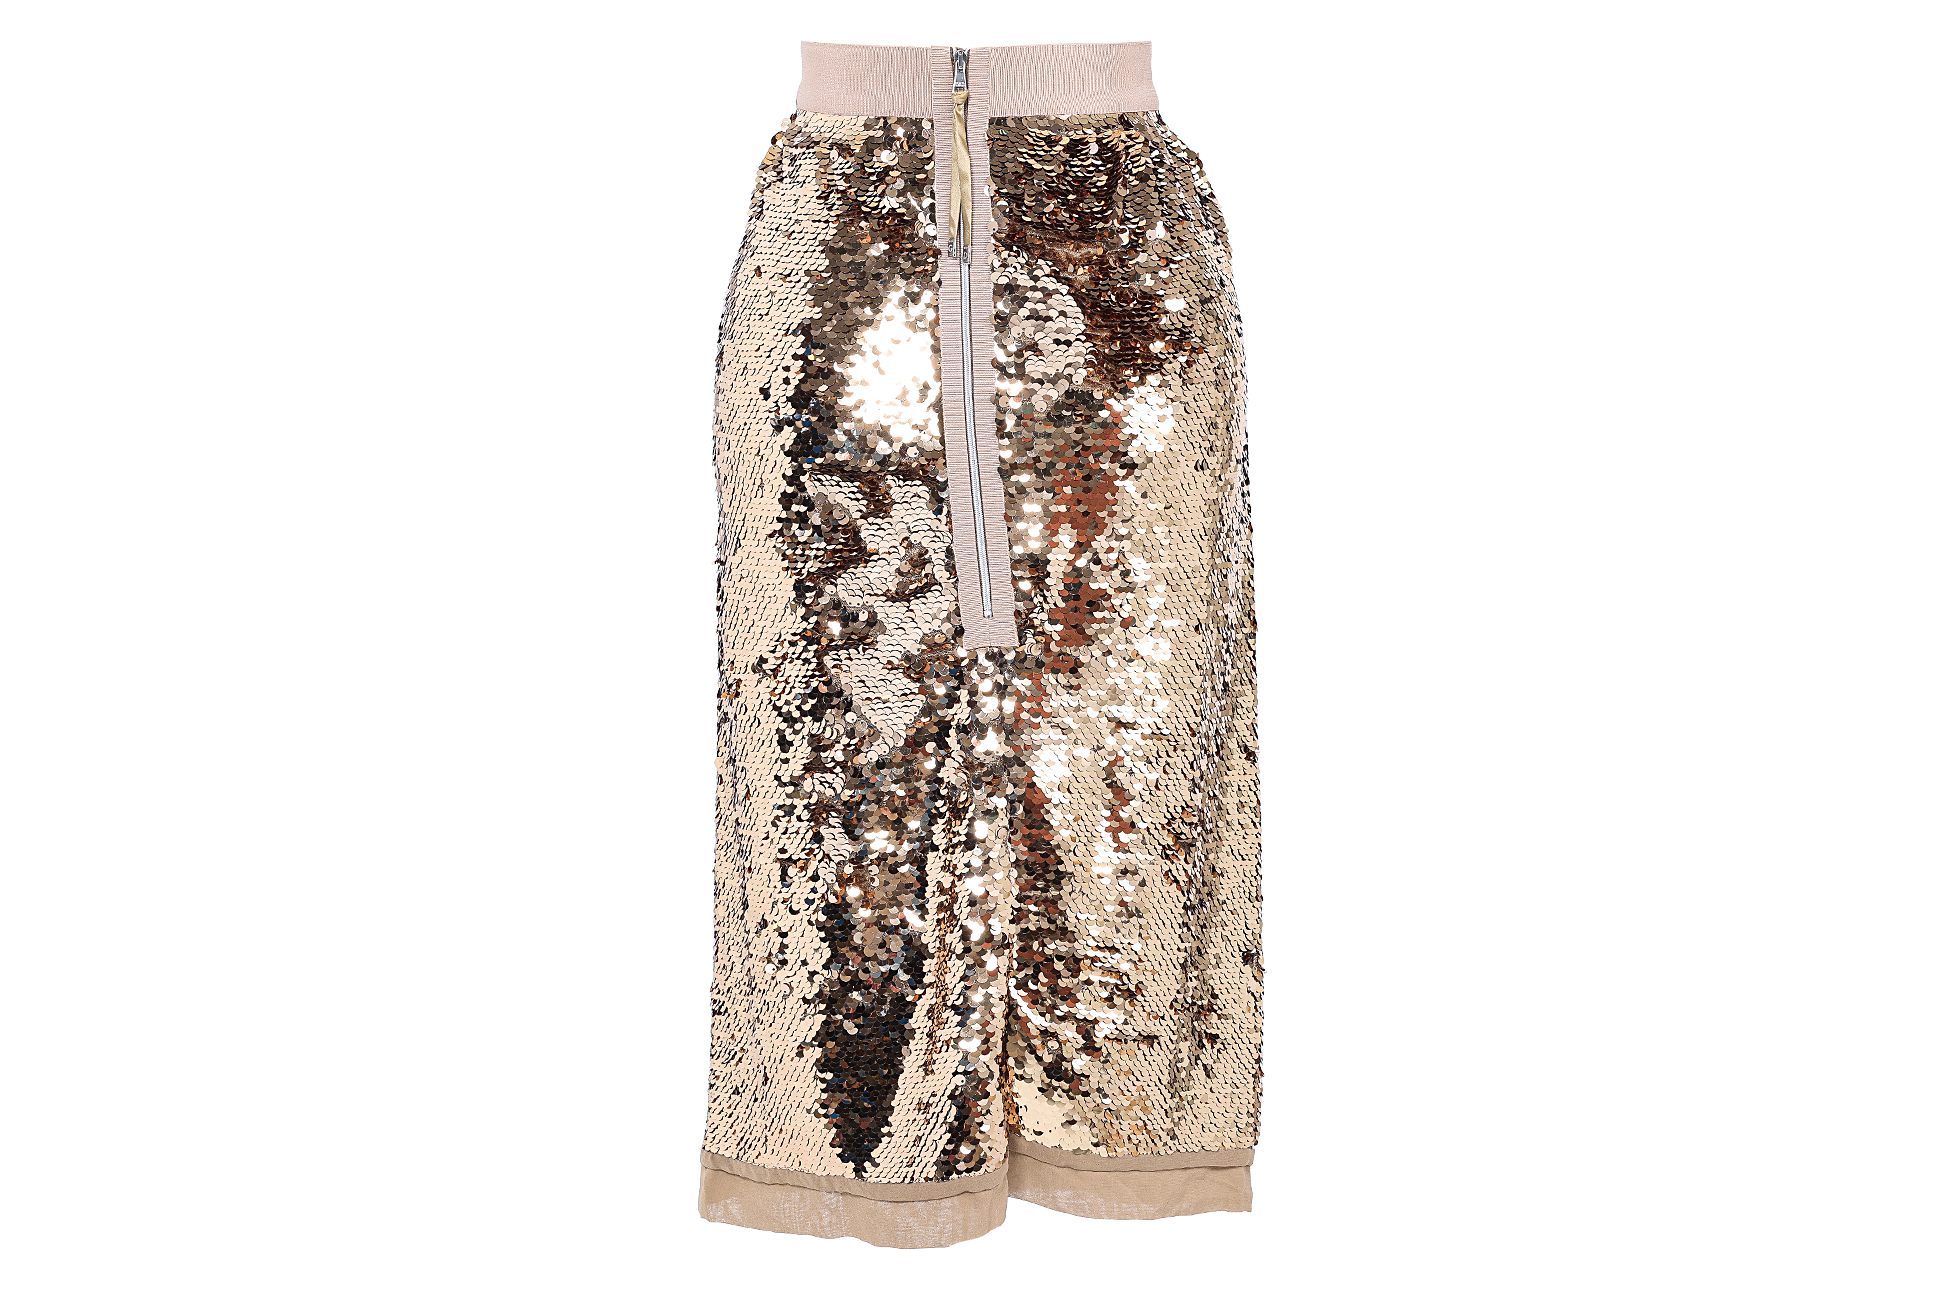 A DOLCE & GABBANA GOLD SEQUINED SKIRT - Image 2 of 2